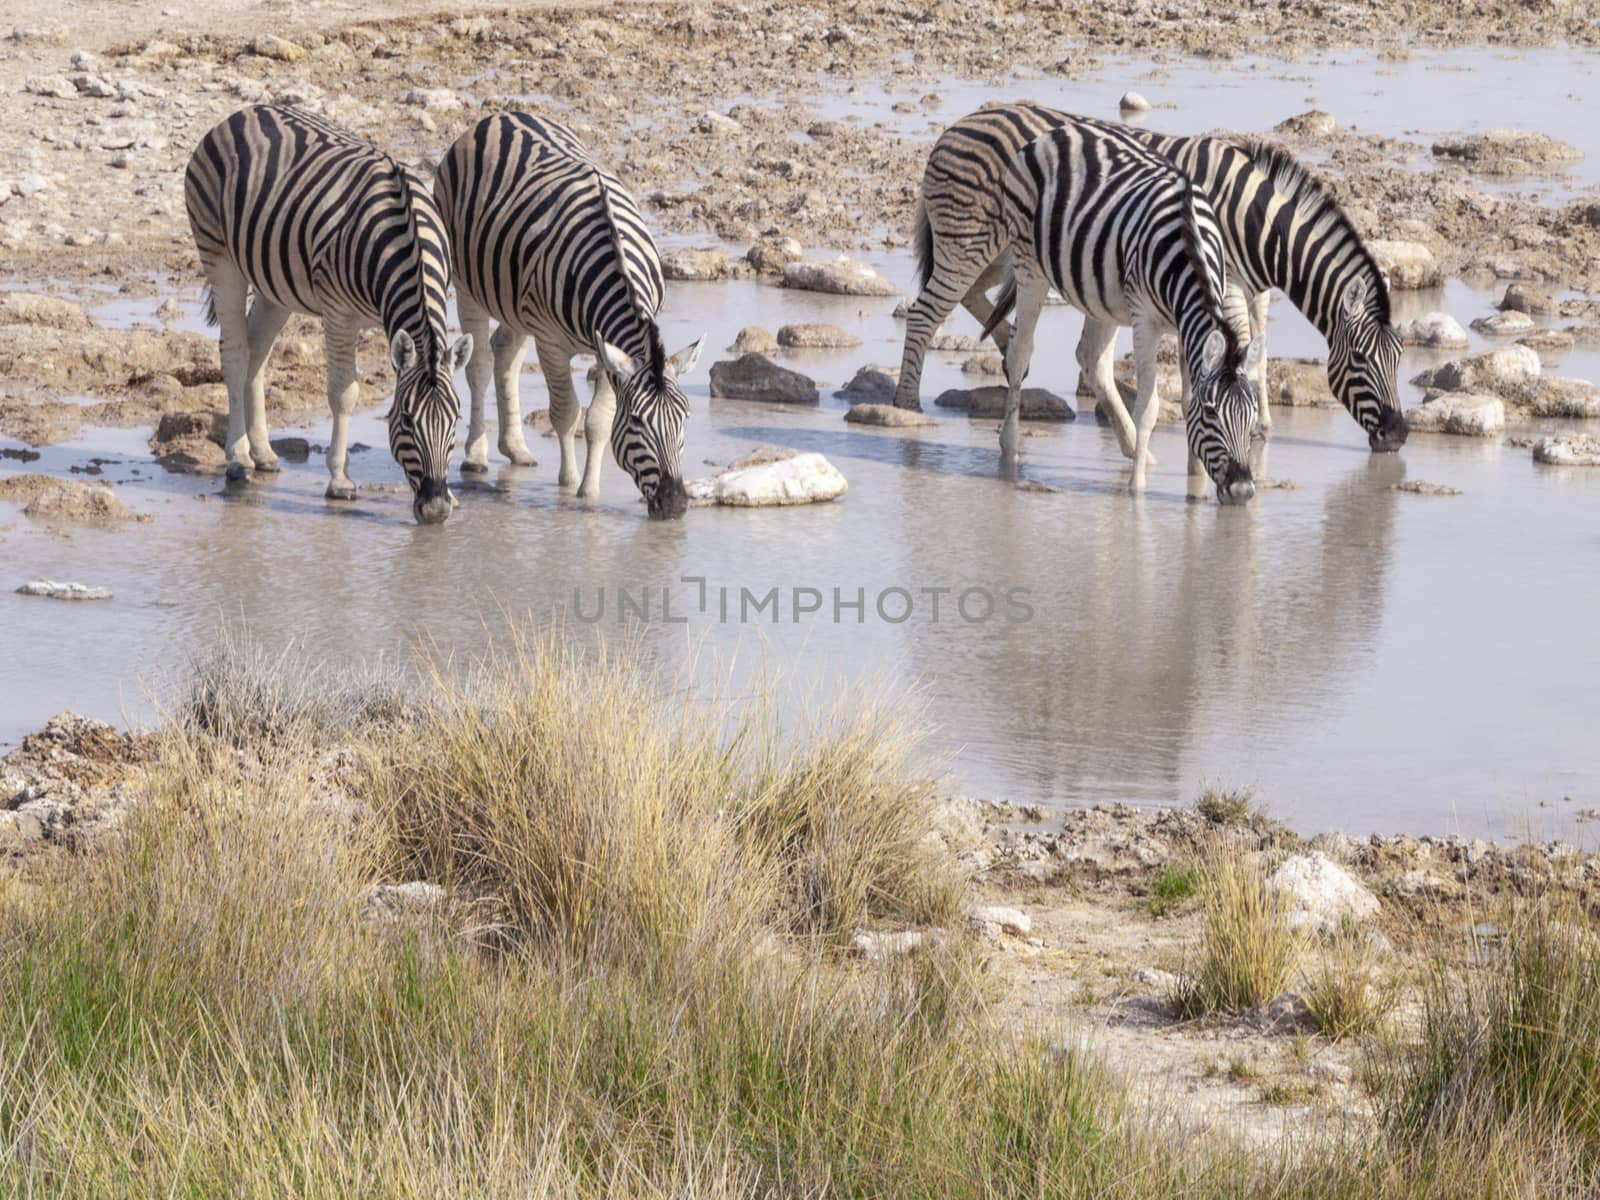 Zebras drinking at a waterhole in the Etosha National Park in Namibia in Africa.